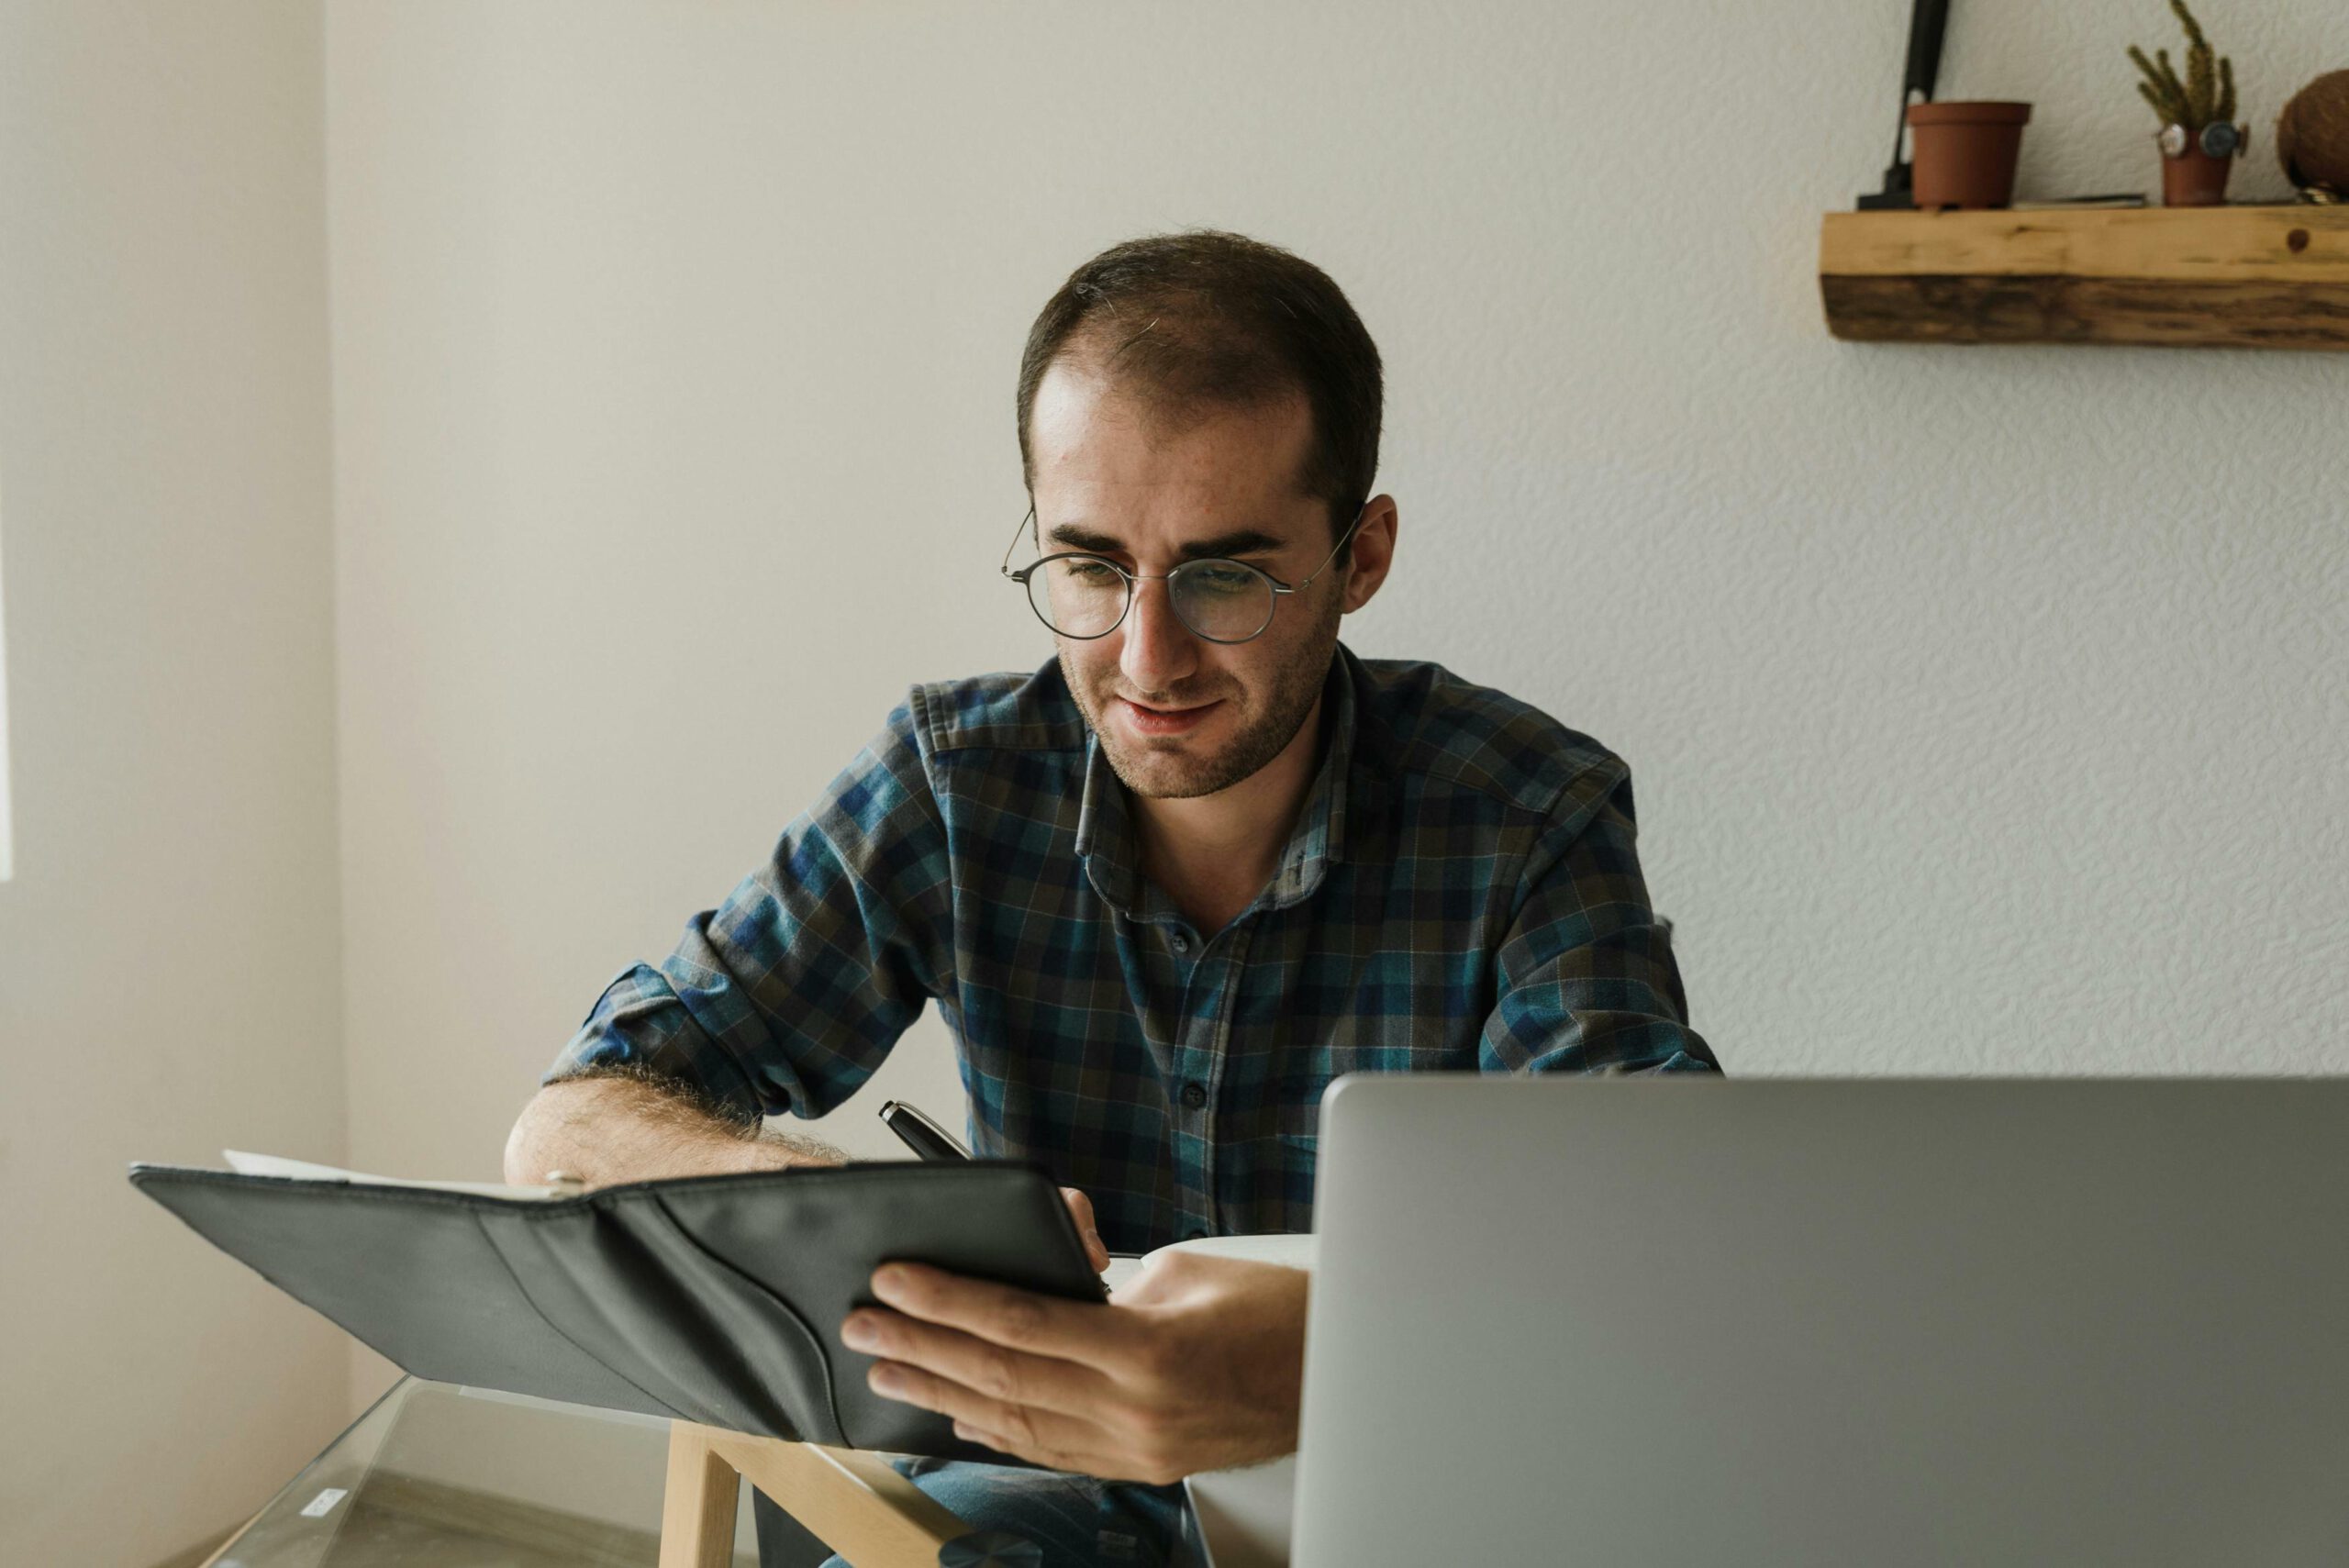 Man writing in book with laptop